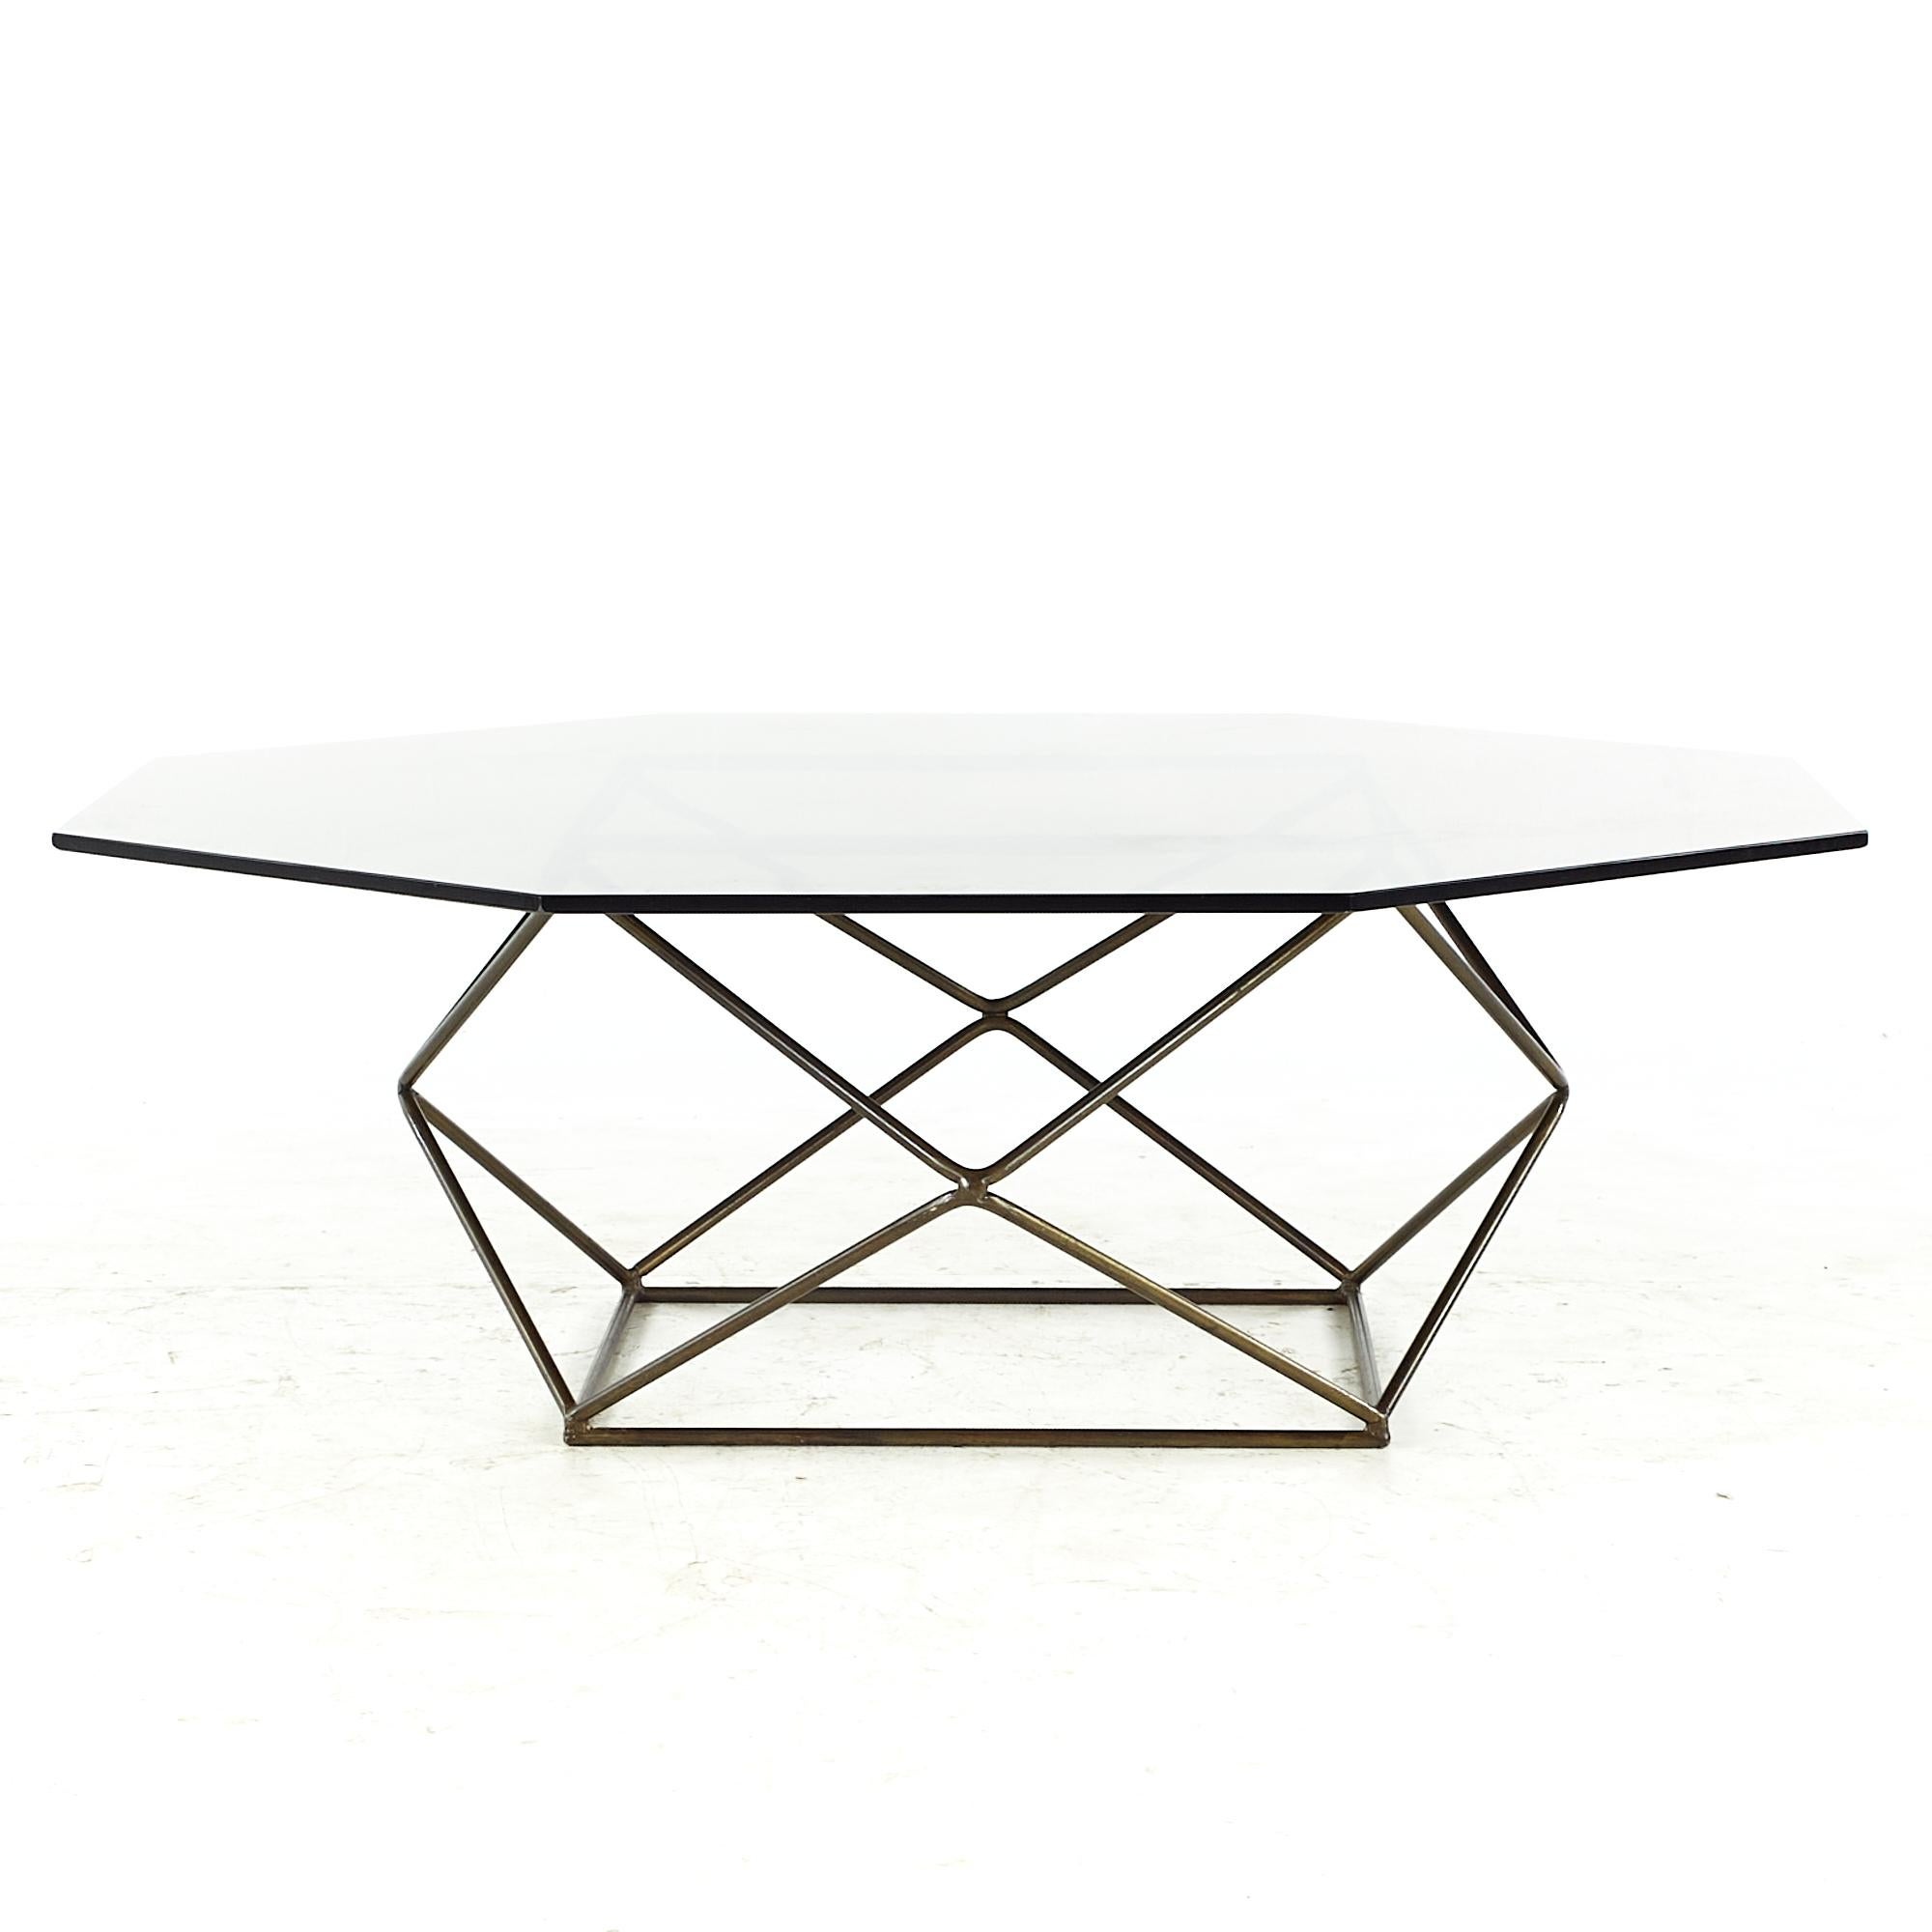 Milo Baughman for Directional midcentury coffee table

This coffee table measures: 48 wide x 48 deep x 16.5 inches high

All pieces of furniture can be had in what we call restored vintage condition. That means the piece is restored upon